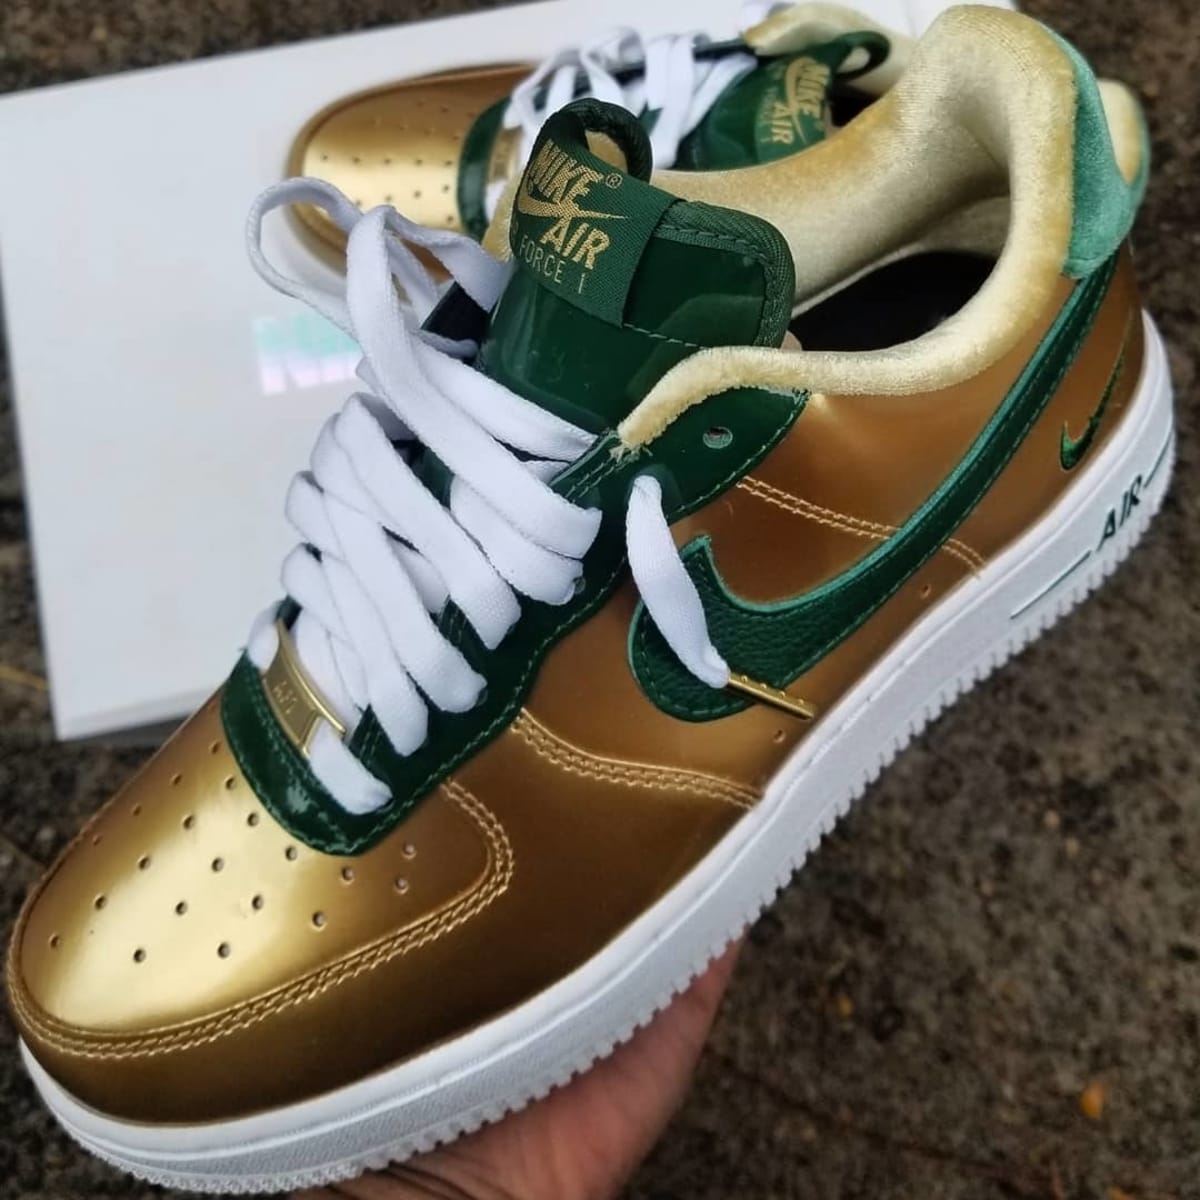 NIKEiD Air Force 1 Low Nigel Sylvester Gold BBS - Nike By You NIKEiD